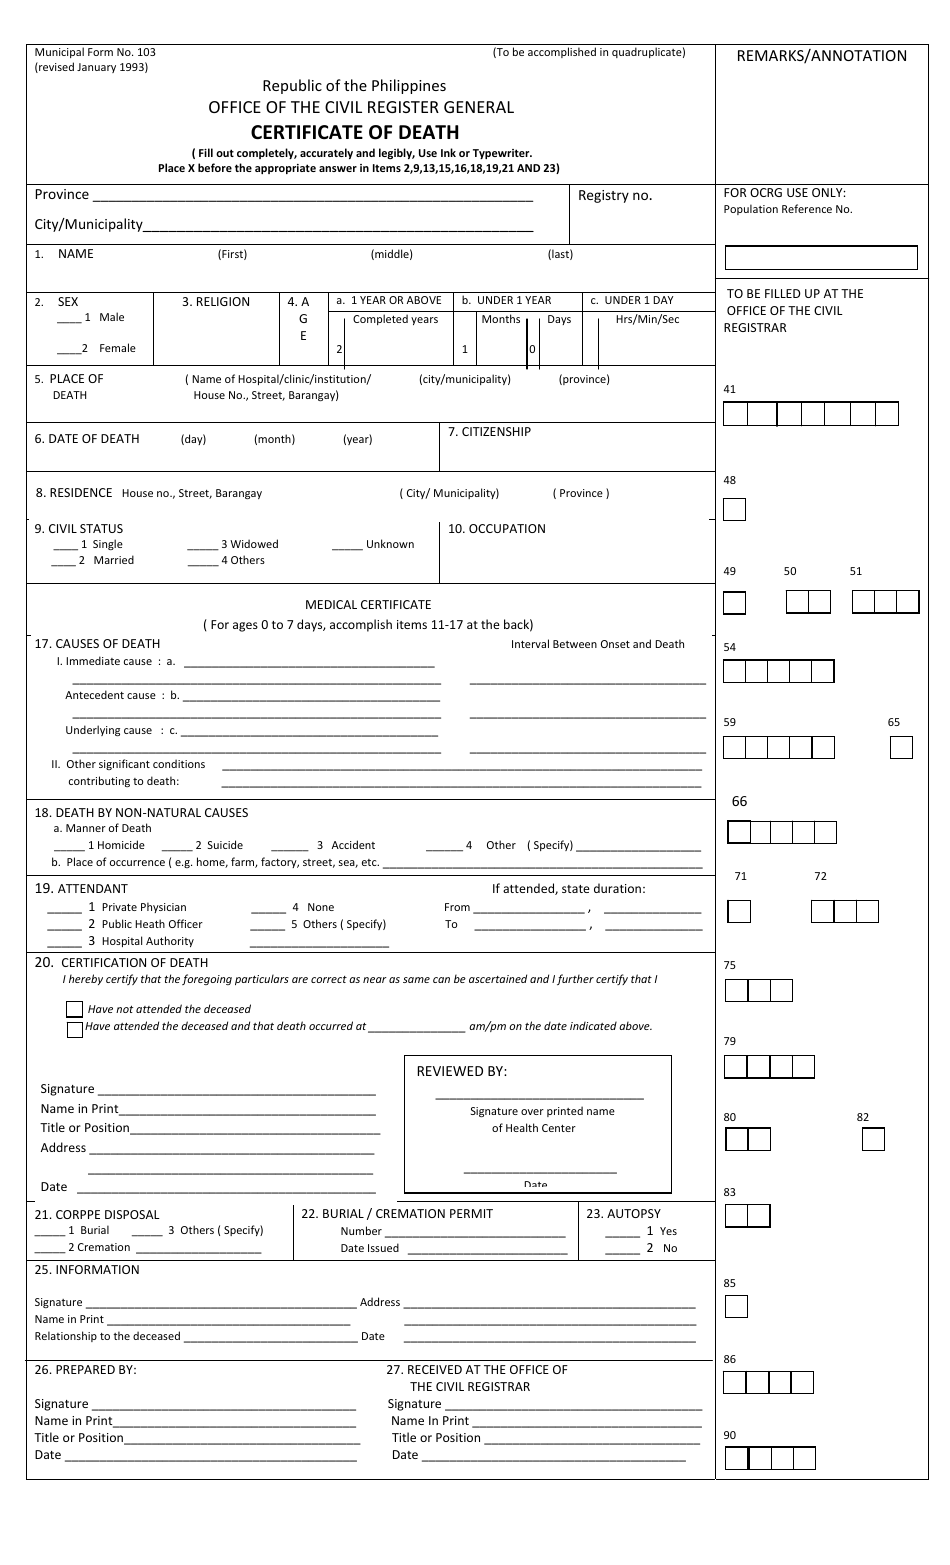 Municipal Form 103 Certificate of Death - Catbqalogan, Philippines, Page 1